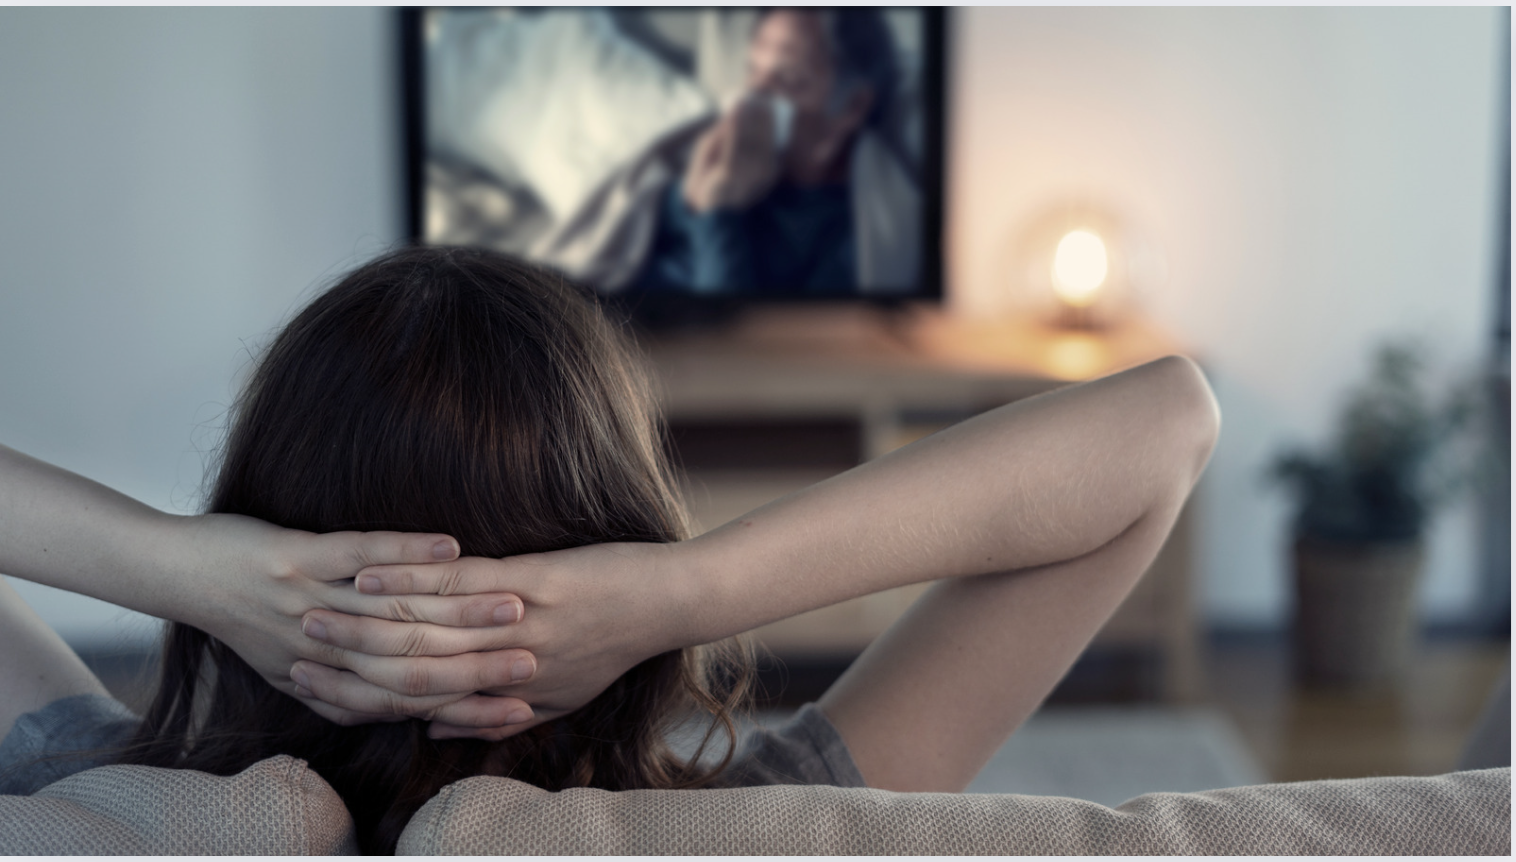 Connected TV Advertising: Everything You Need to Know